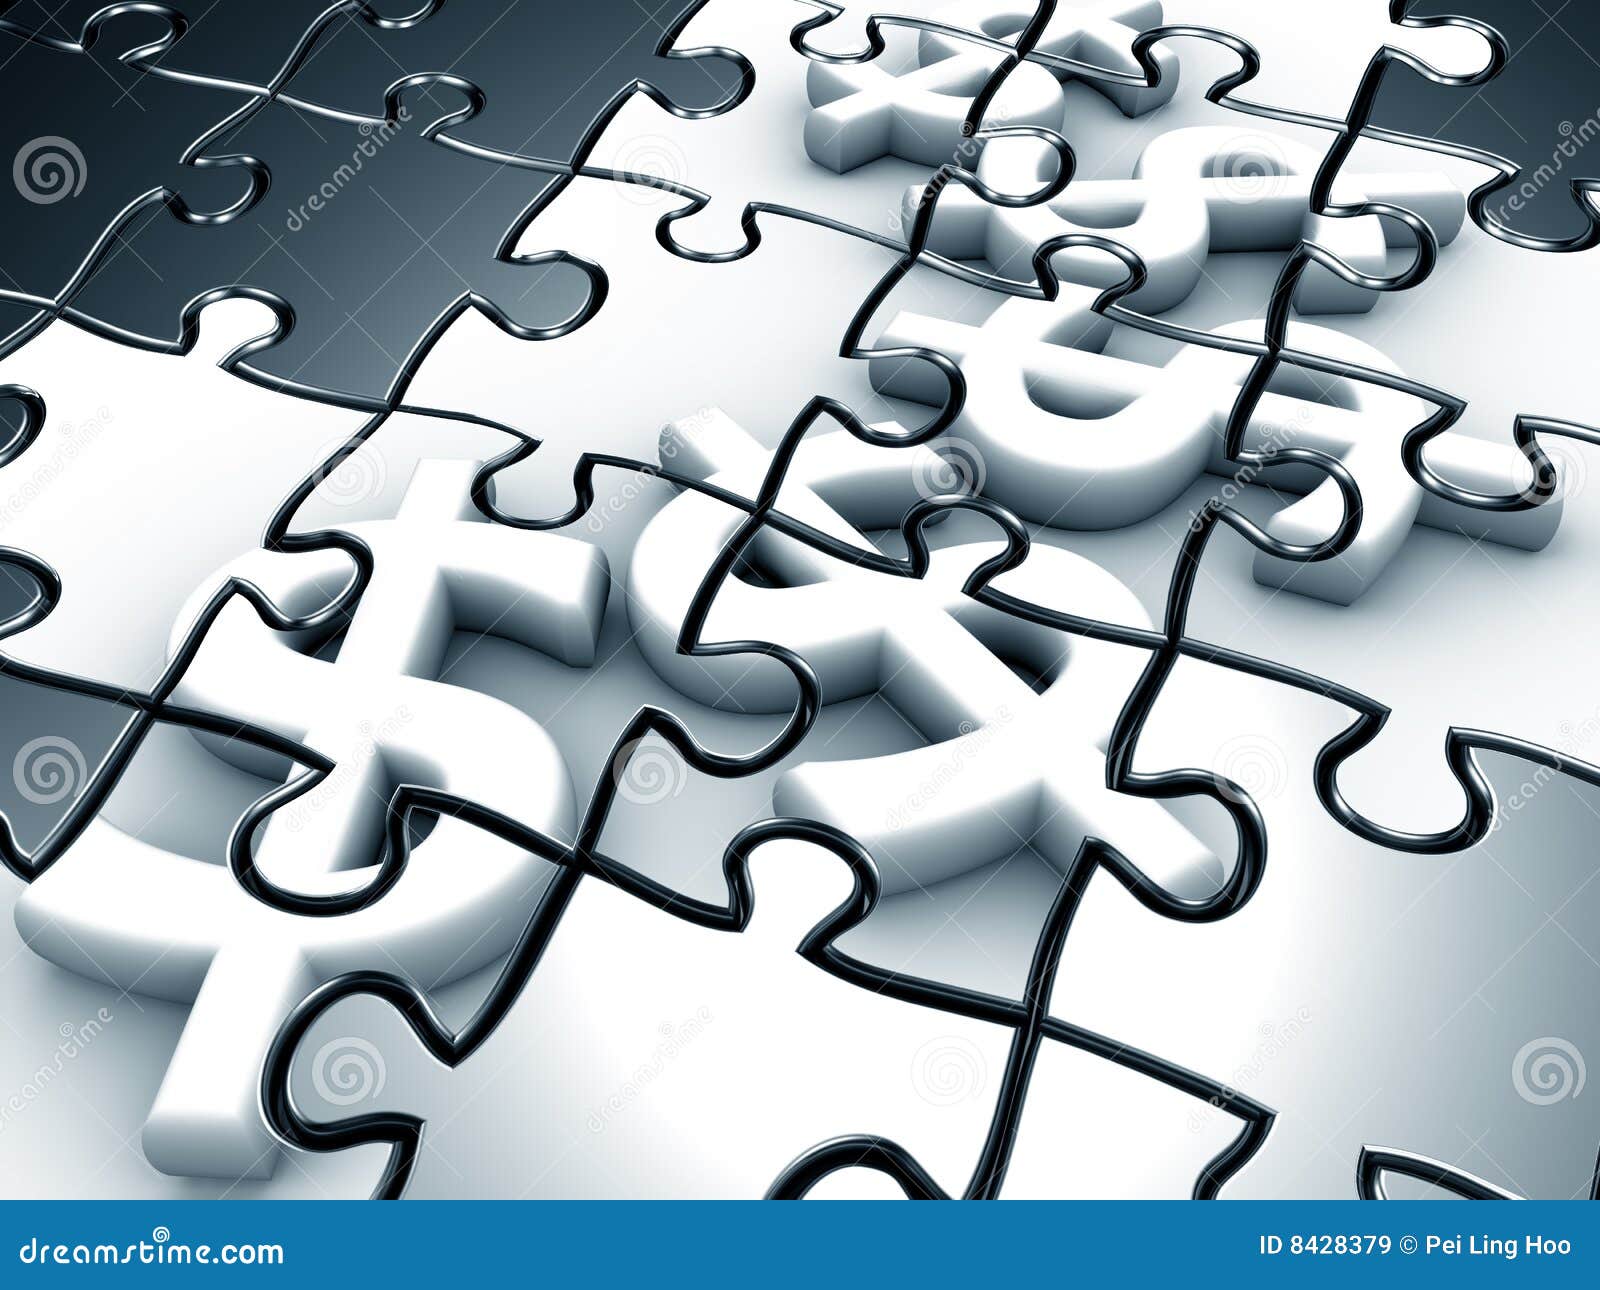 Help Support Guidance Direction Assistance Puzzle Pieces Illustration Stock  Illustration by ©iqoncept #401483174